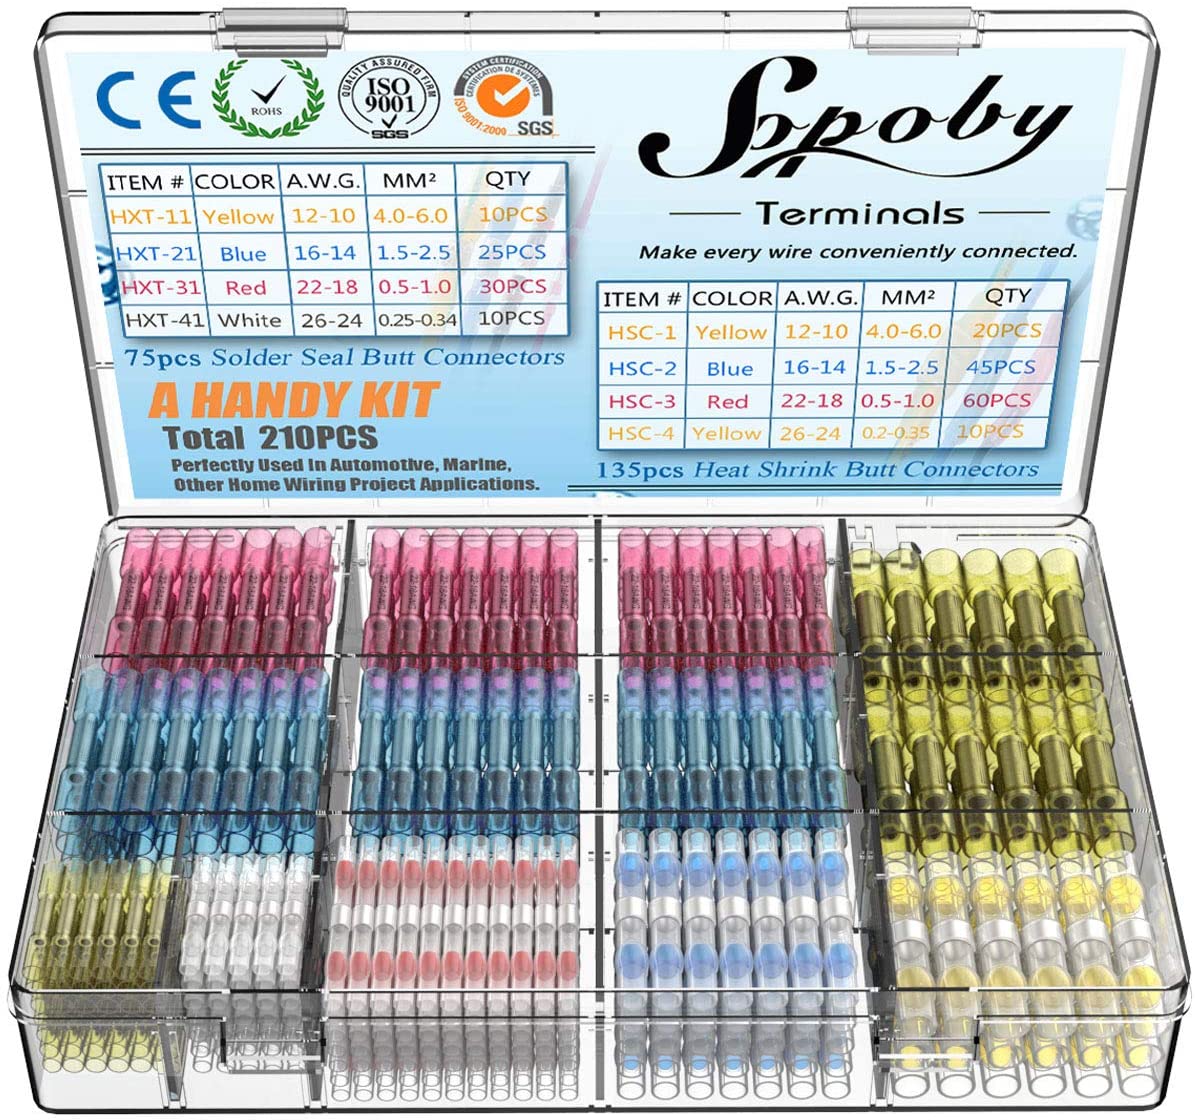 210pcs Heat Shrink Wire Connectors Sopoby 135 pcs Heat Shrink Crimp Butt Connectors Mixed with 75 pcs Solder Seal Wire Connectors 26-10GA Electrical Connectors Waterproof Assorted Wire cnectors Kit - (For 8 piece(s))